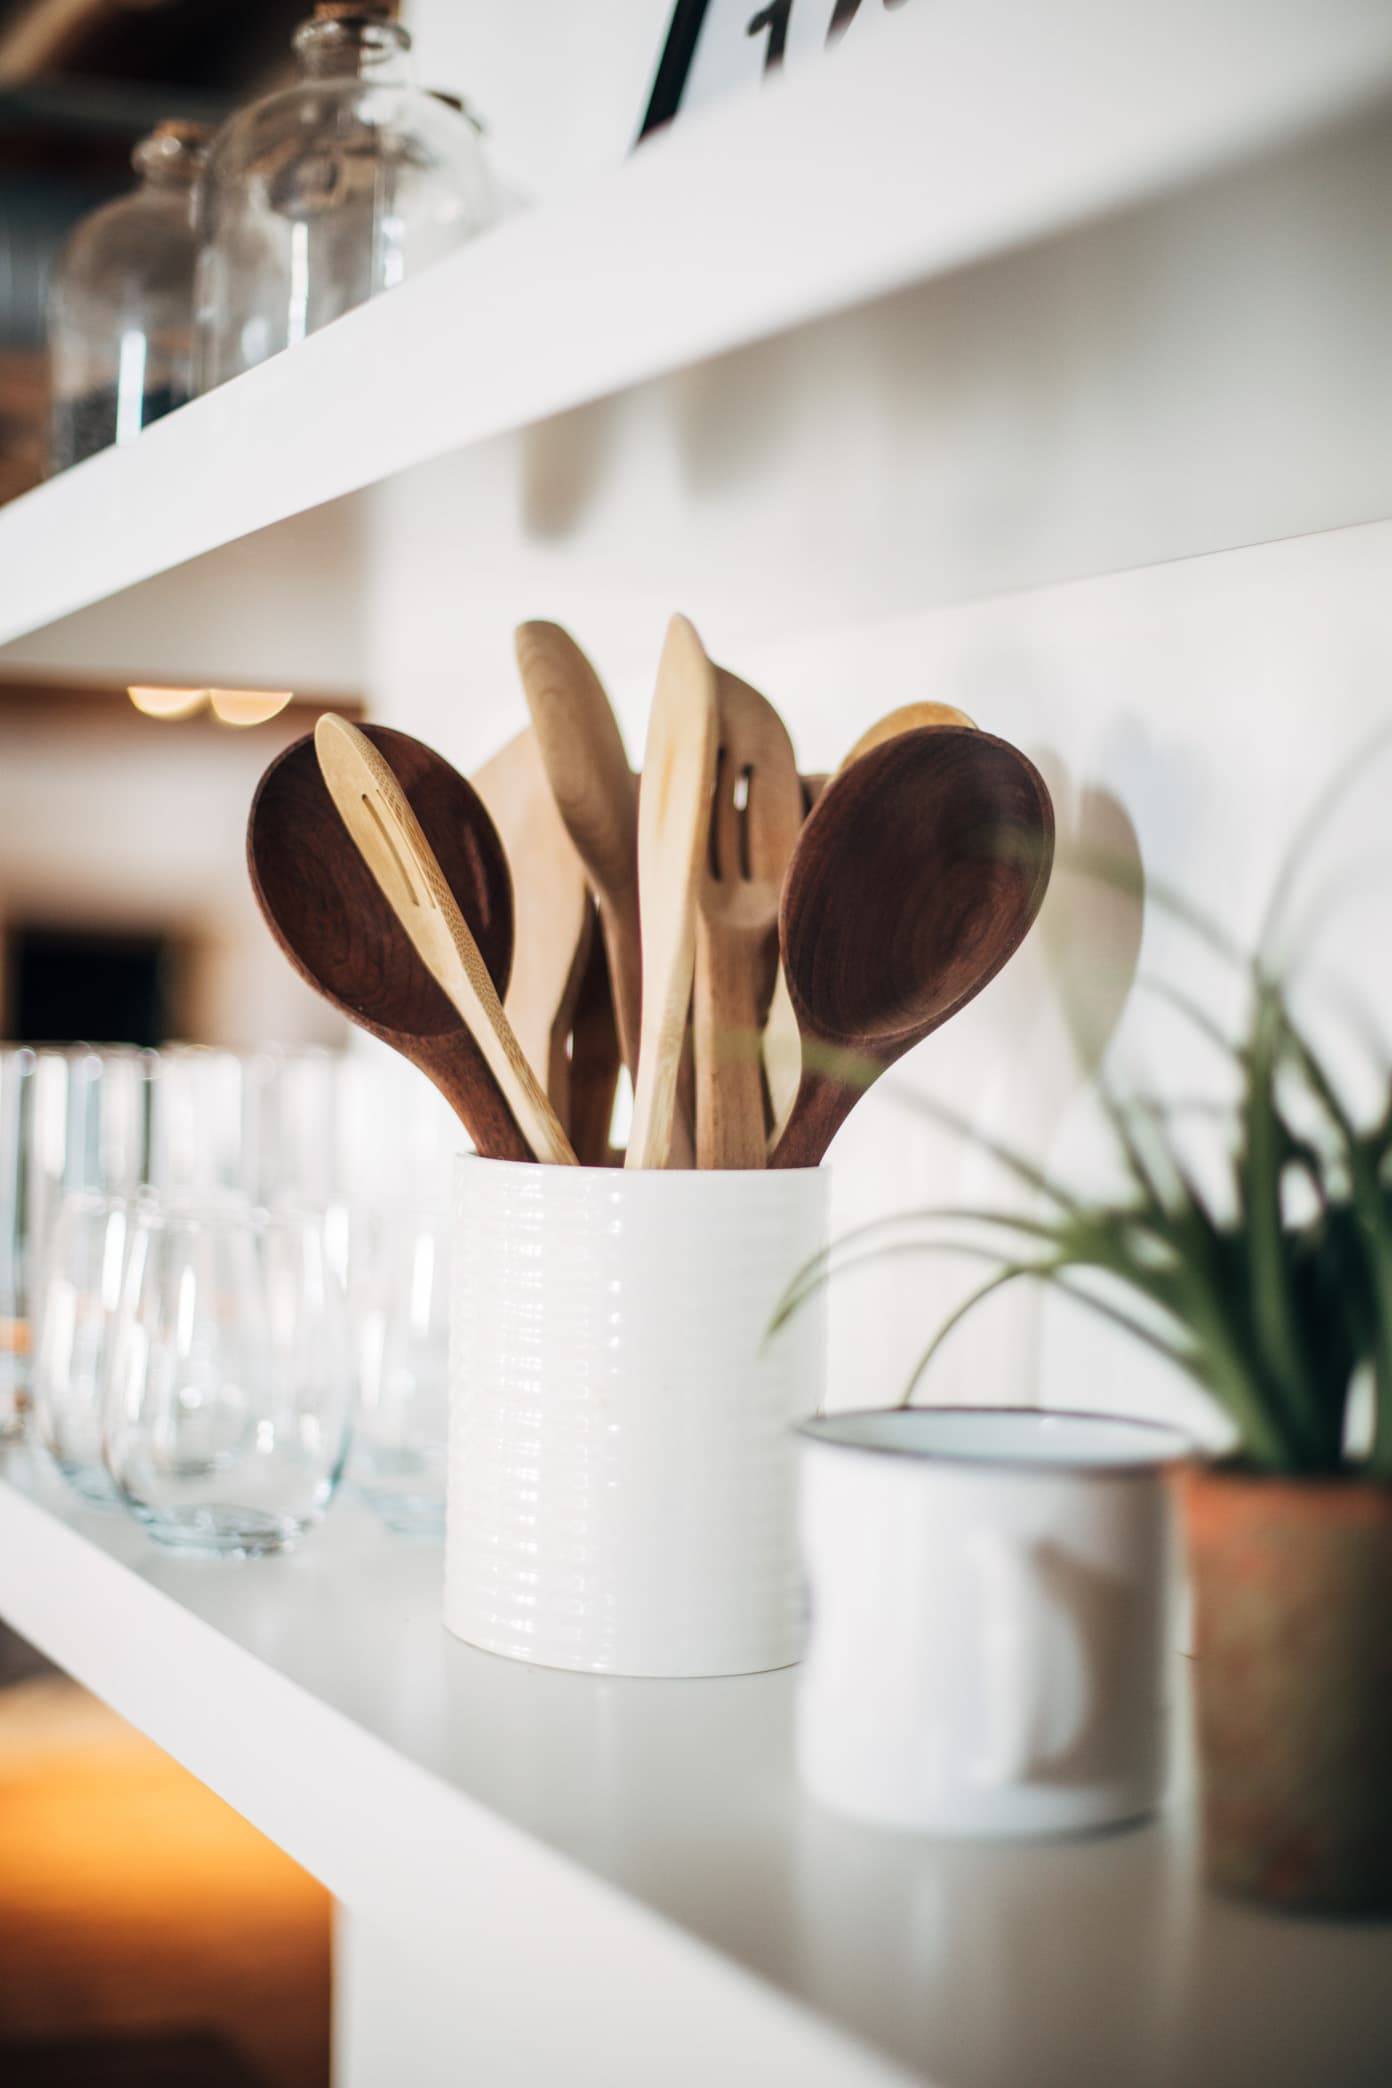 Wooden spoons and kitchen items on a white shelf.